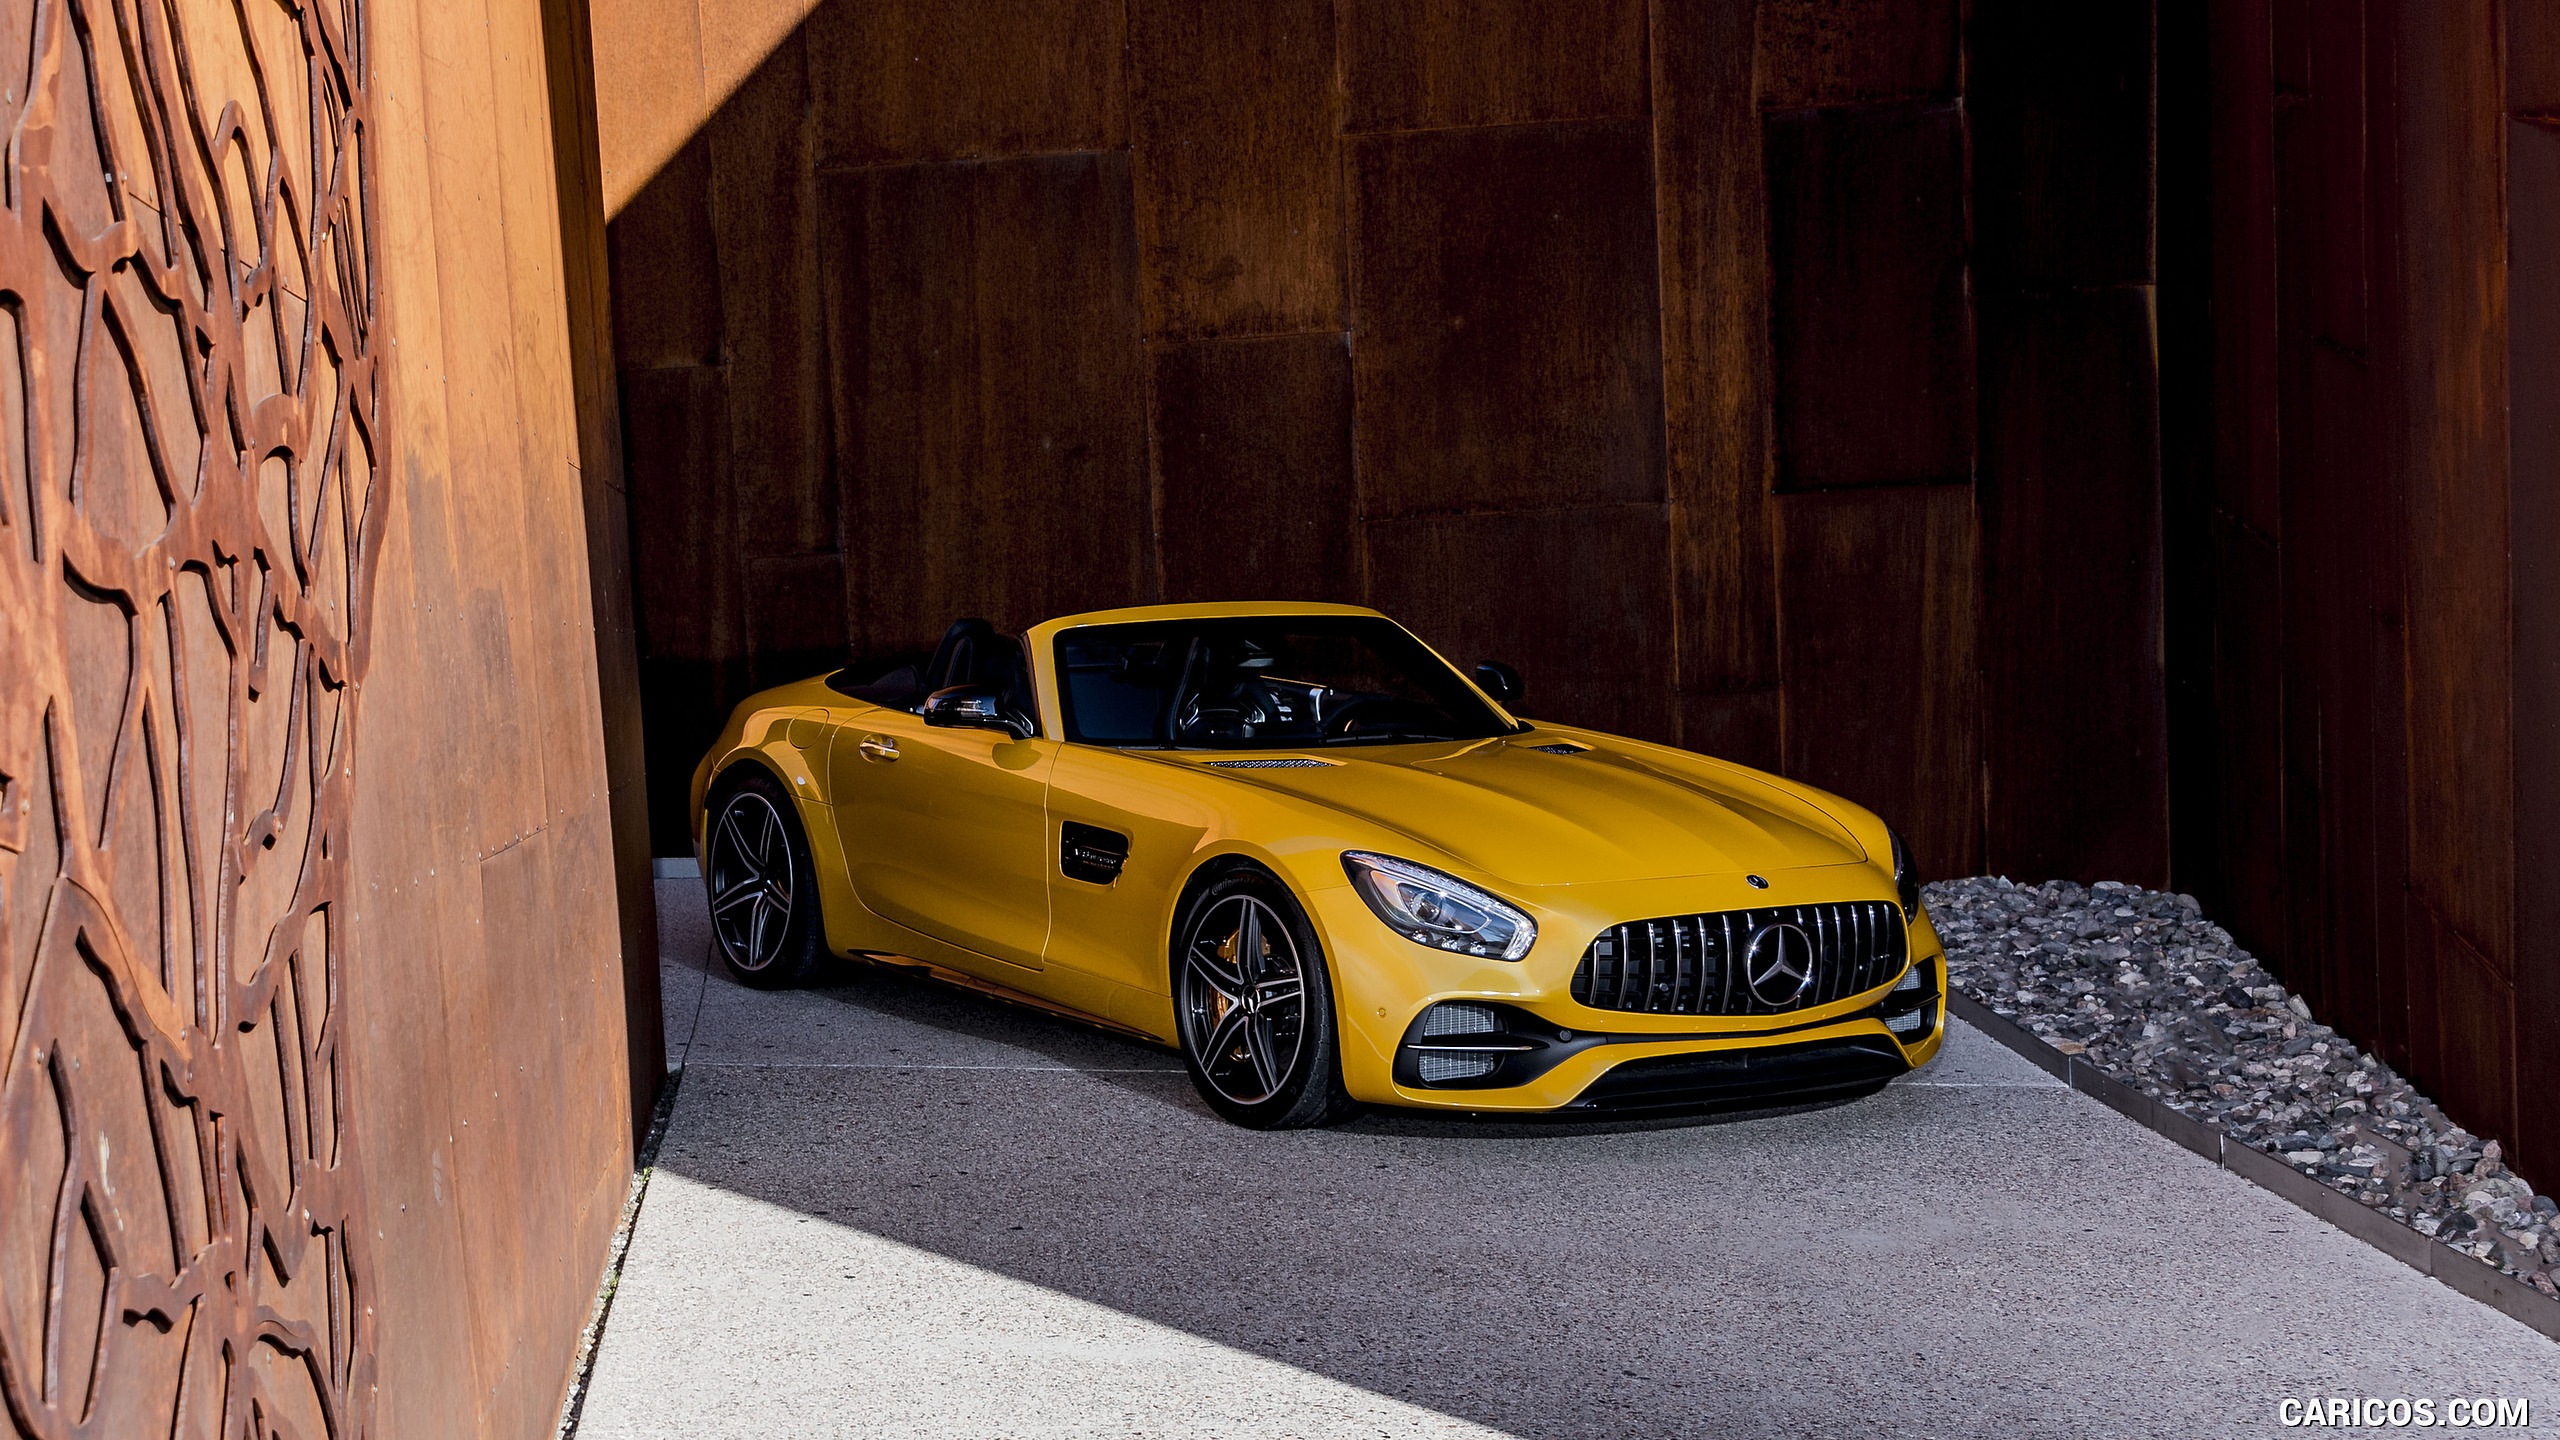 2018 Mercedes-AMG GT C Roadster - Front Three-Quarter, #248 of 350